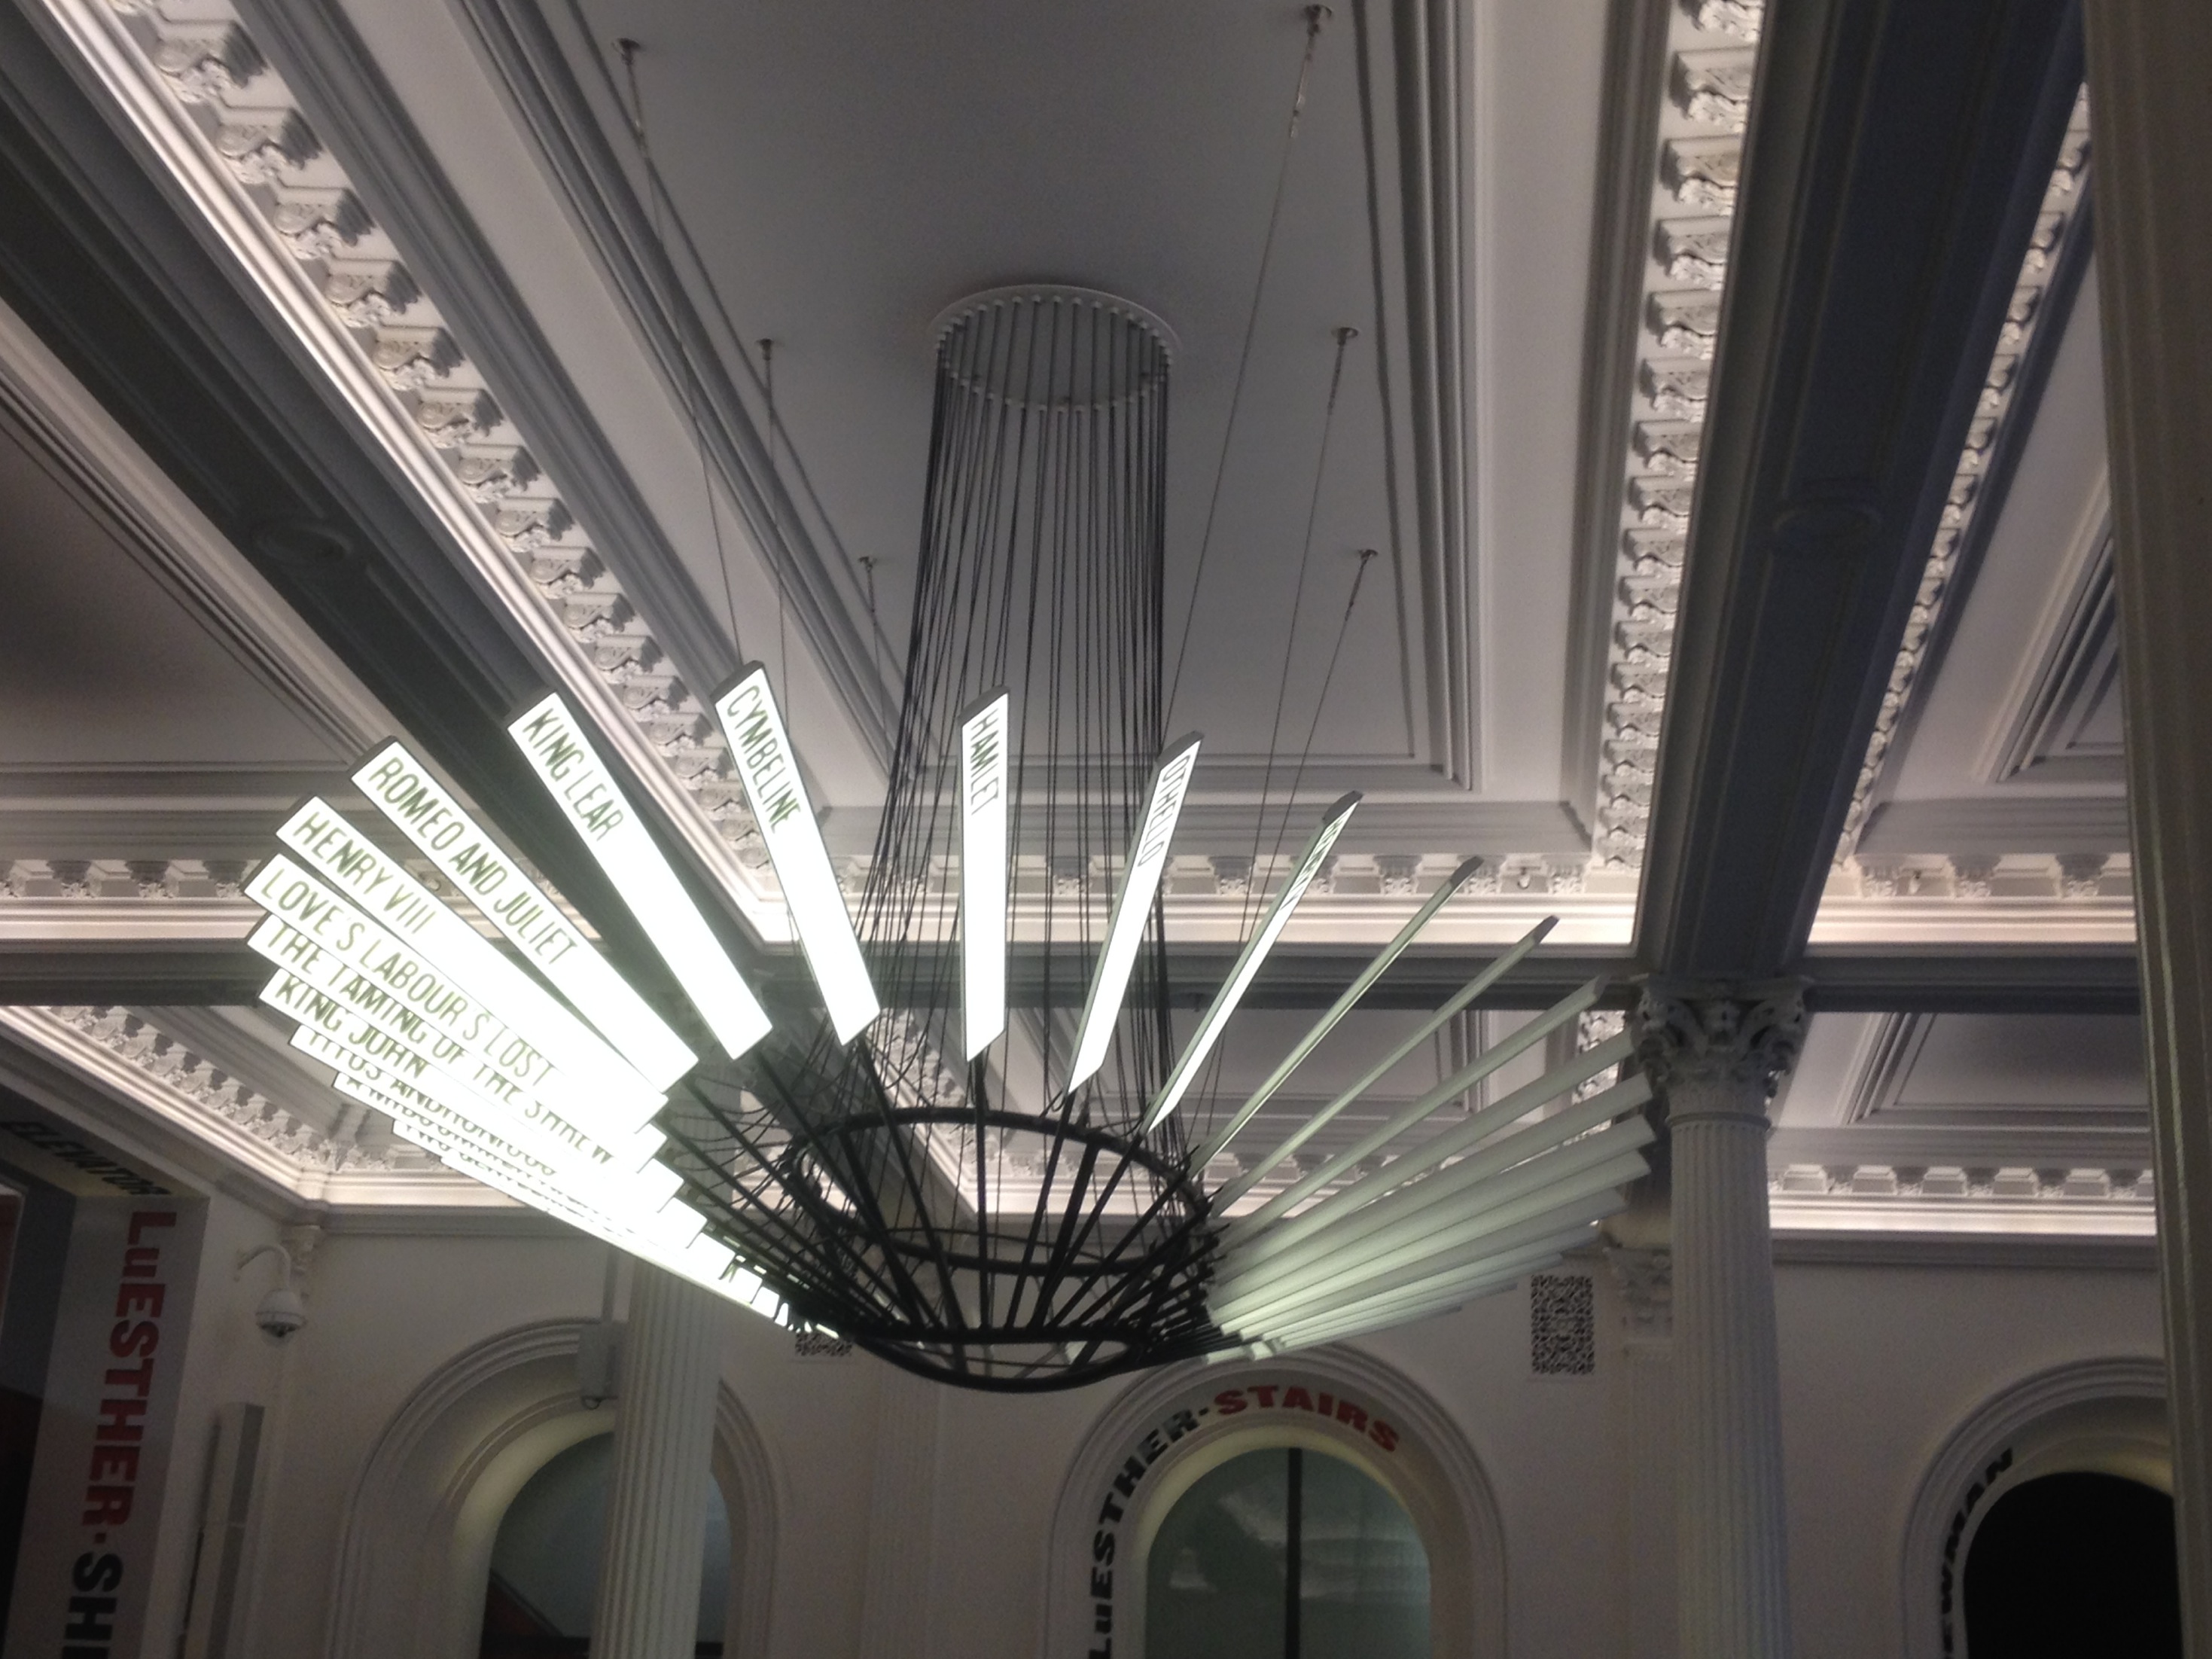 The central digital chandelier, an artwork by Ben Rubin and Mark Hansen, is actually a great source of light.